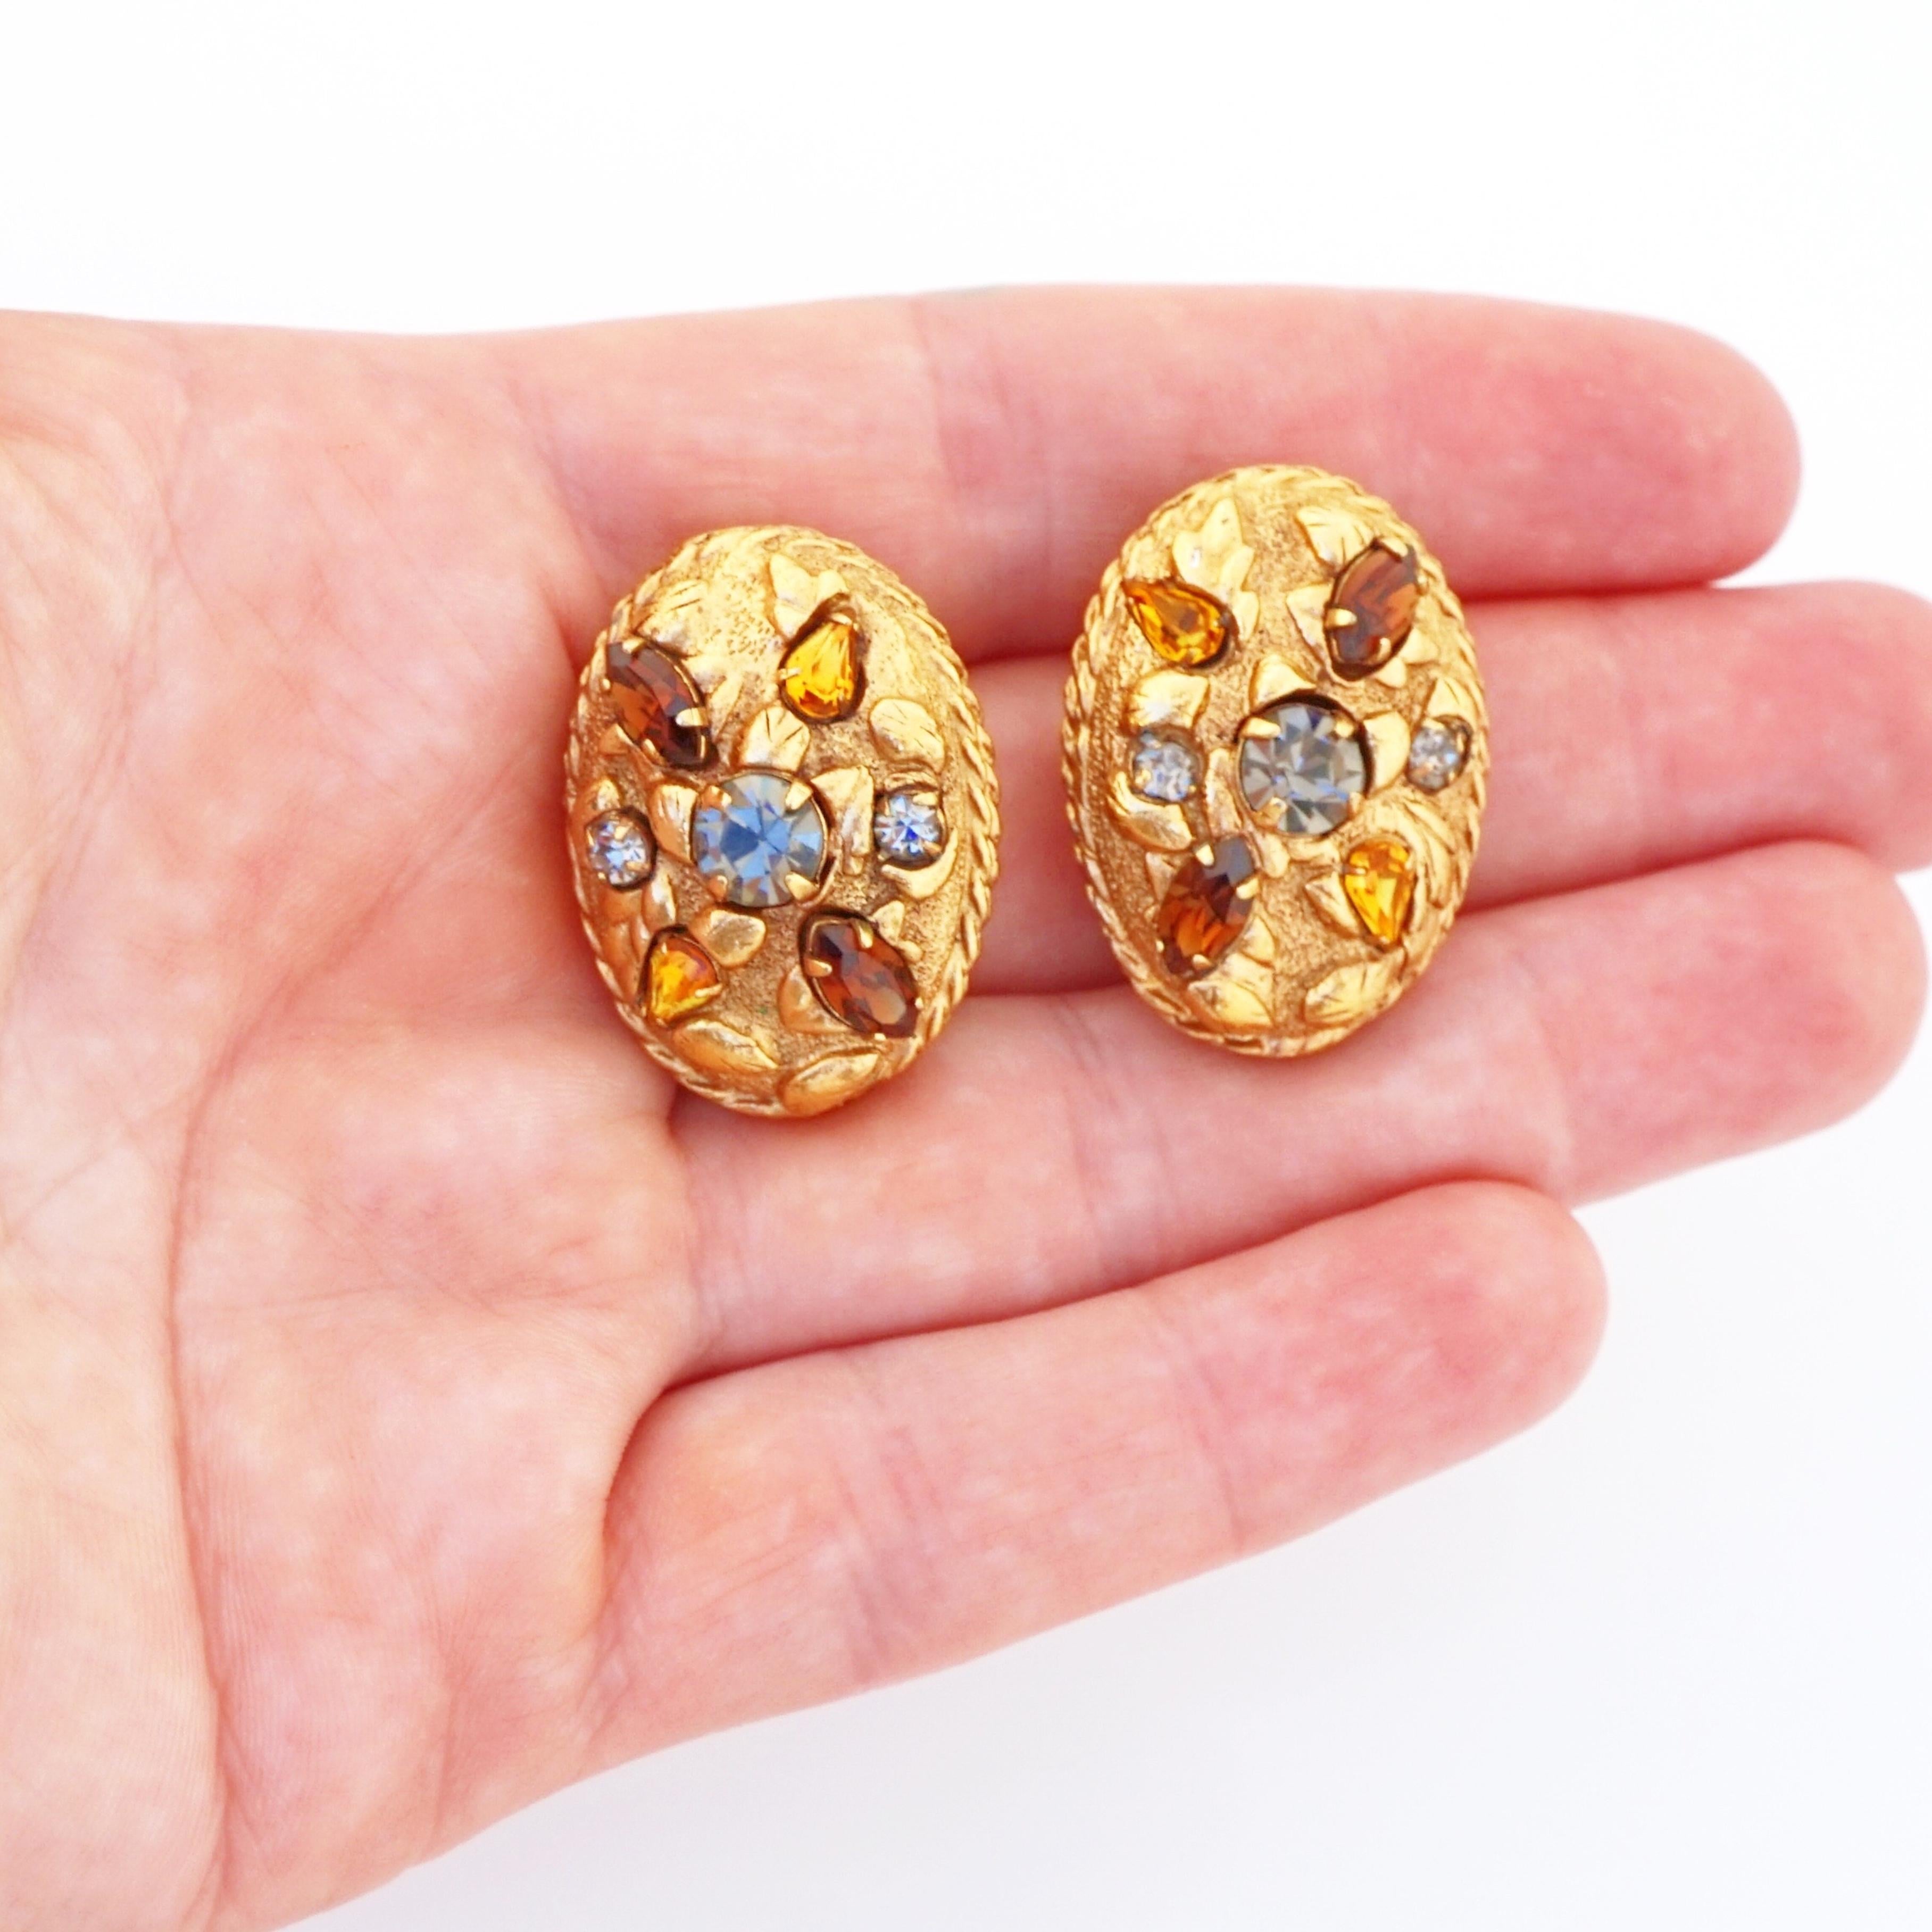 Women's Gilded Etruscan Oval Earrings With Gray, Topaz & Amber Crystals, 1980s For Sale